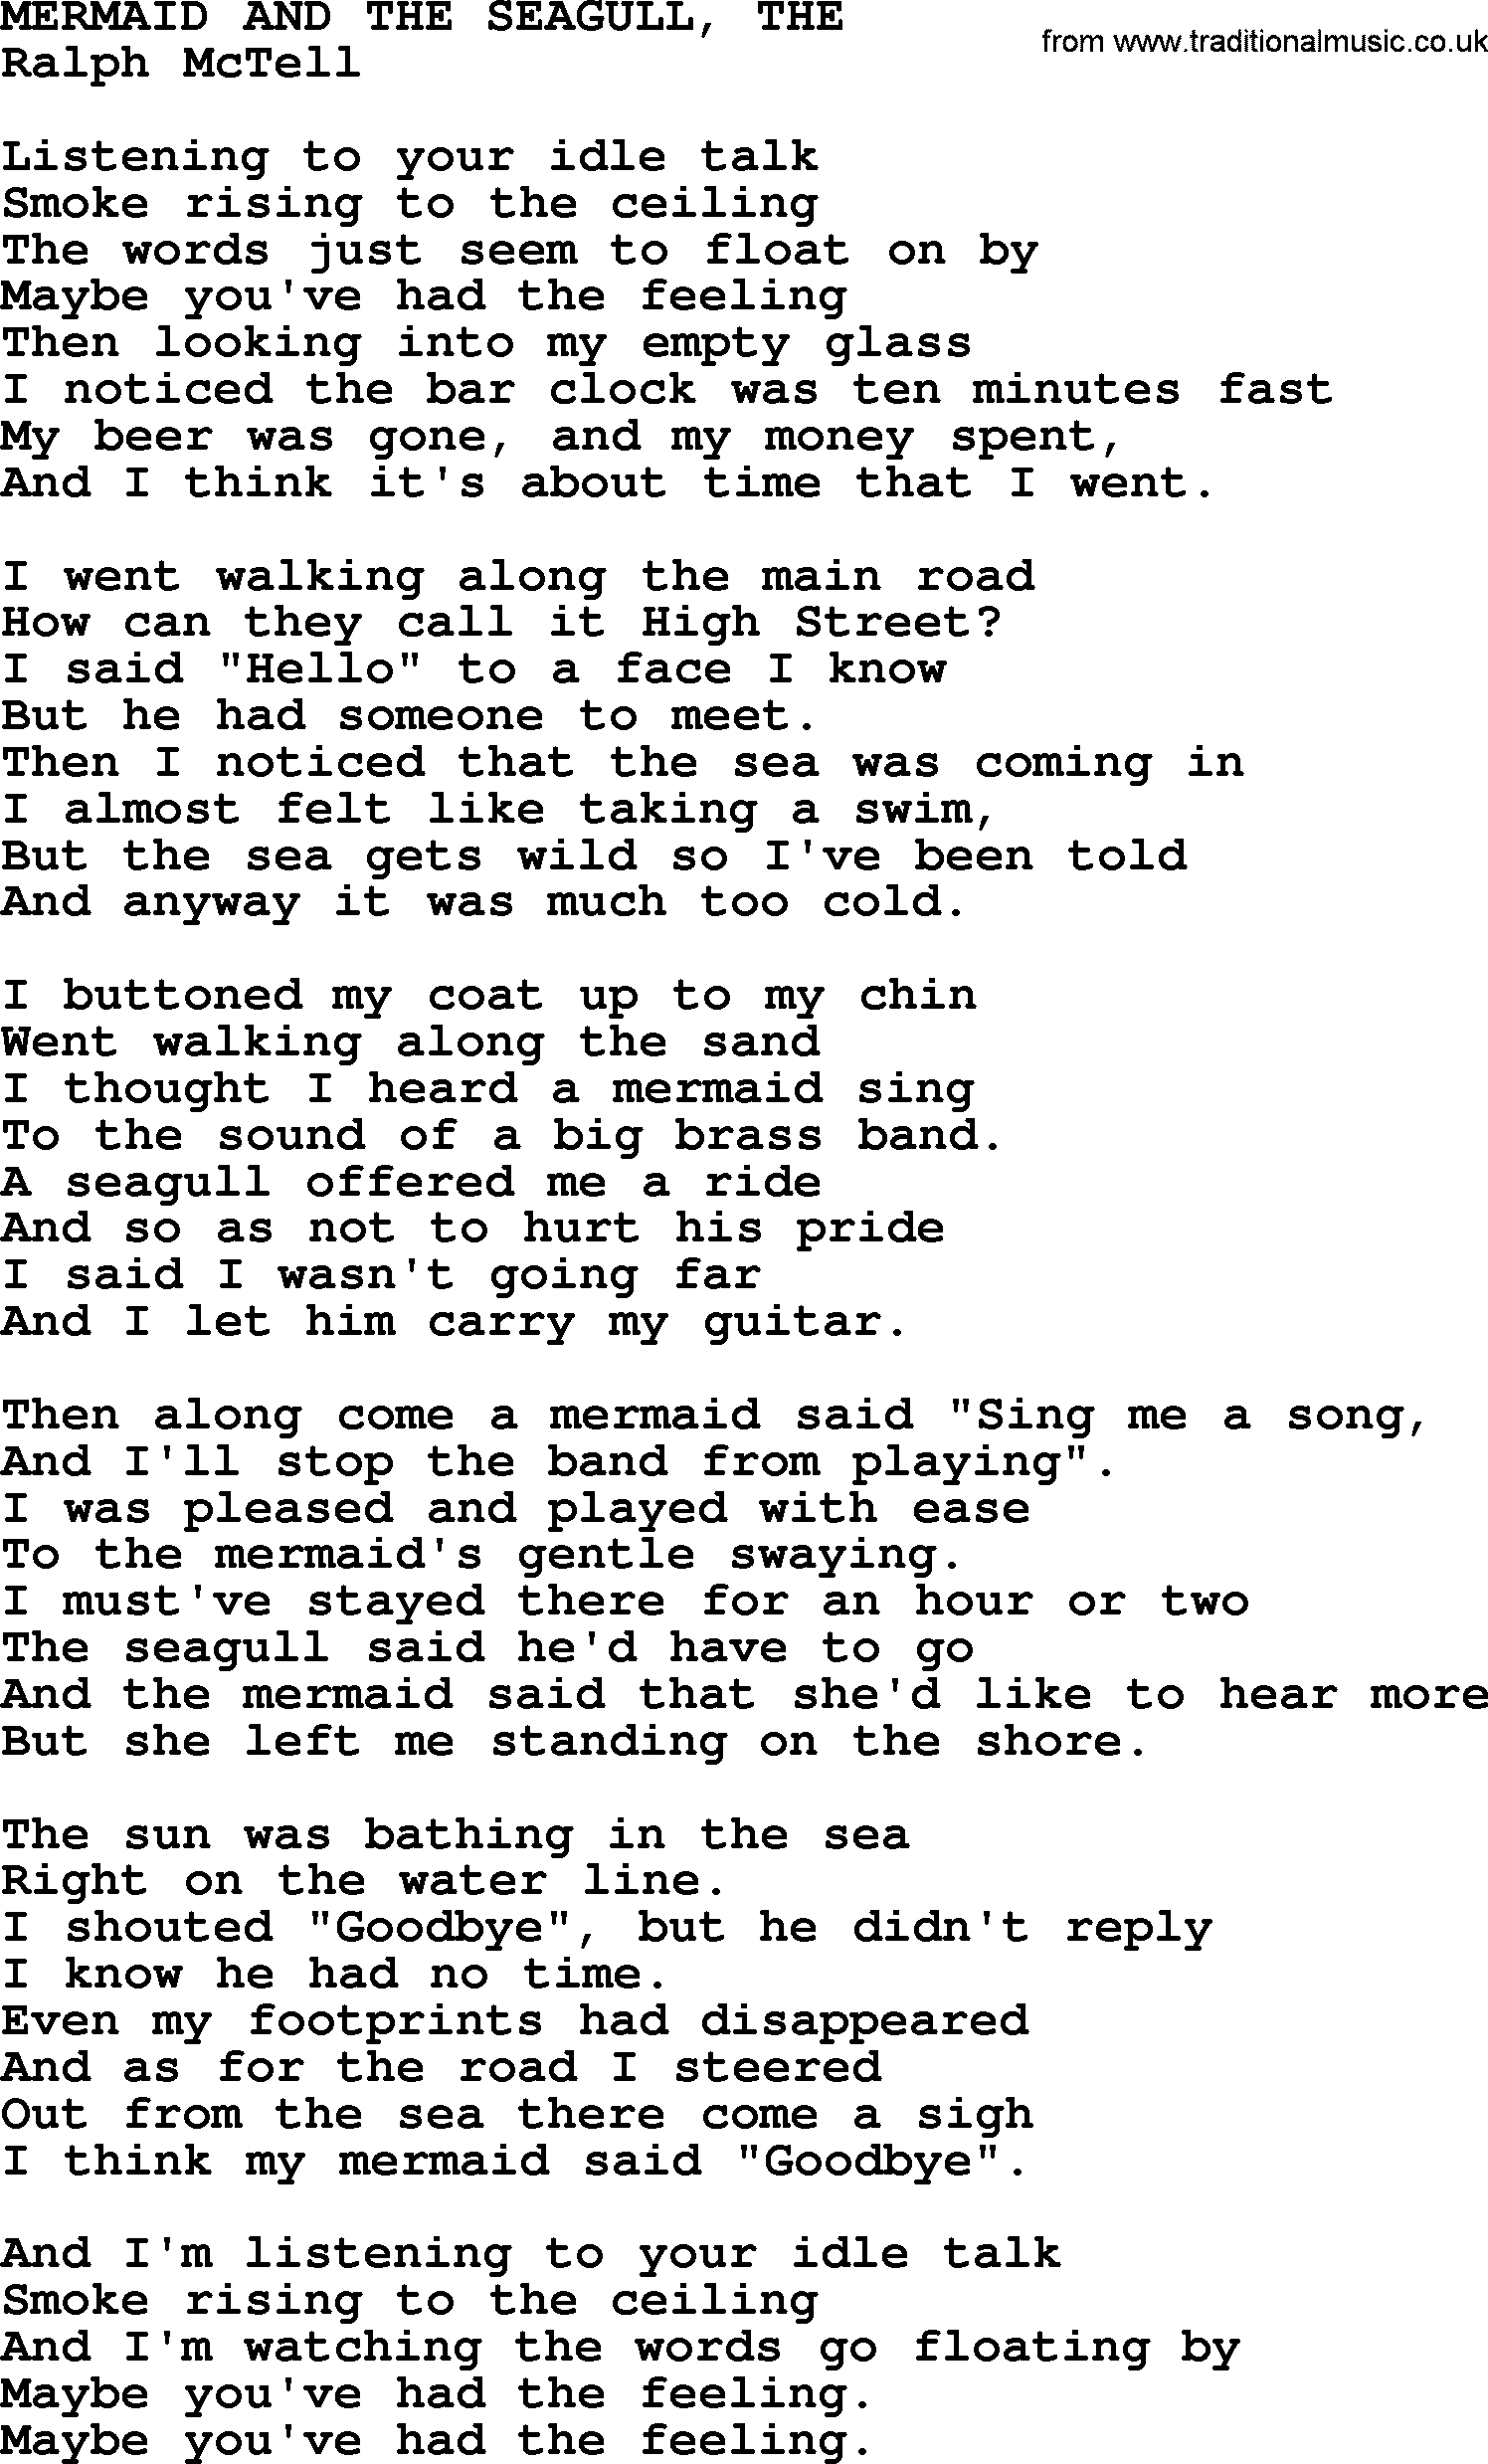 Mermaid And The Seagull, The.txt - by Ralph McTell lyrics and chords